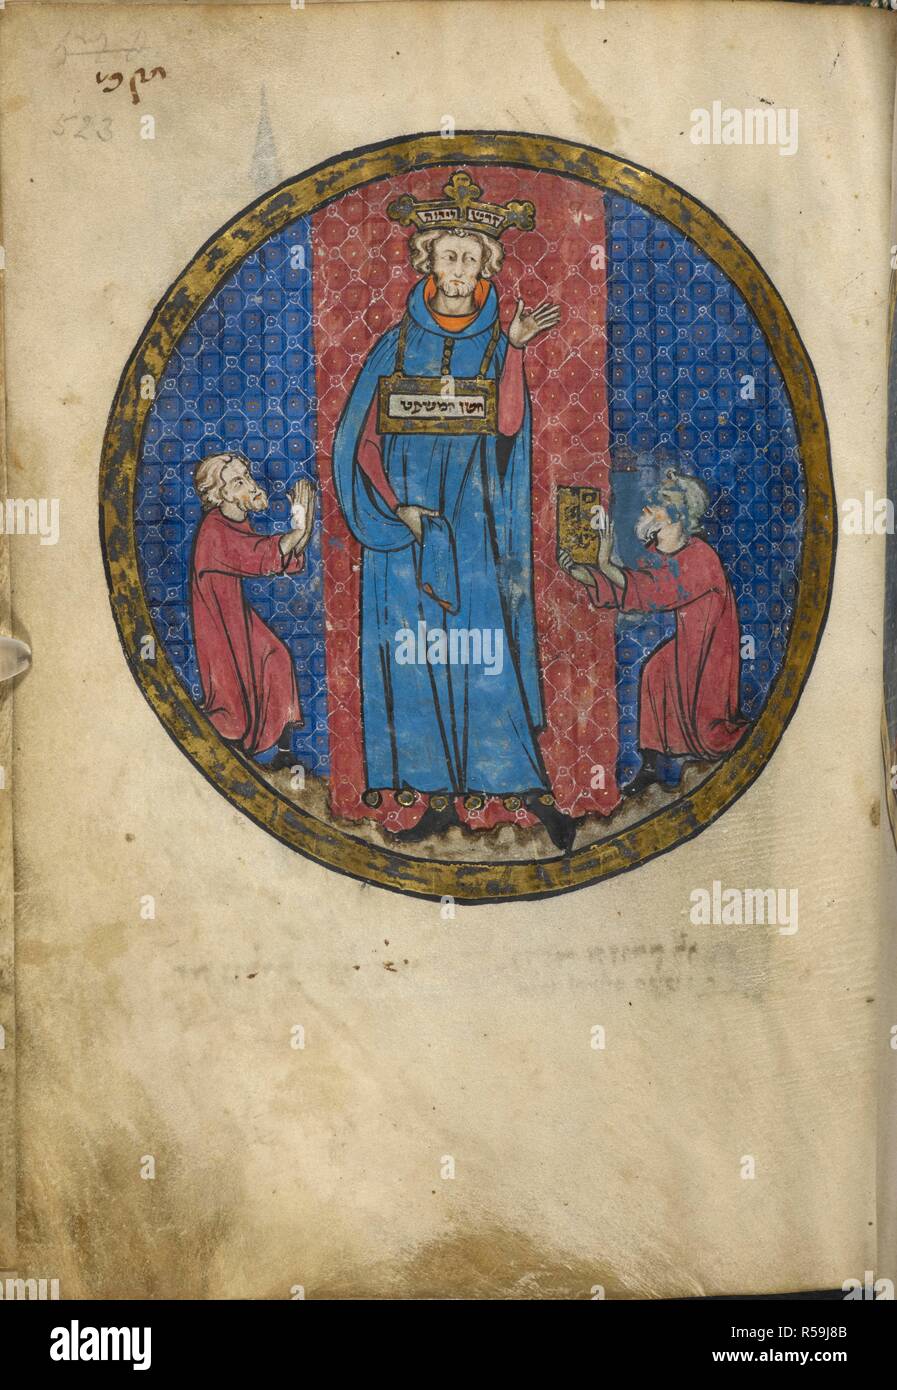 Aaron  the High Priest wearing a long, blue robe with a golden breastplate inscribed the breastplate of judgement. At his feet are the two master artisans Bezalel on the right, and Aholiab on the left. . North French Miscellany. North France, c.1280. Source: Add. 11639, f.523. Author: Benjamin. Stock Photo